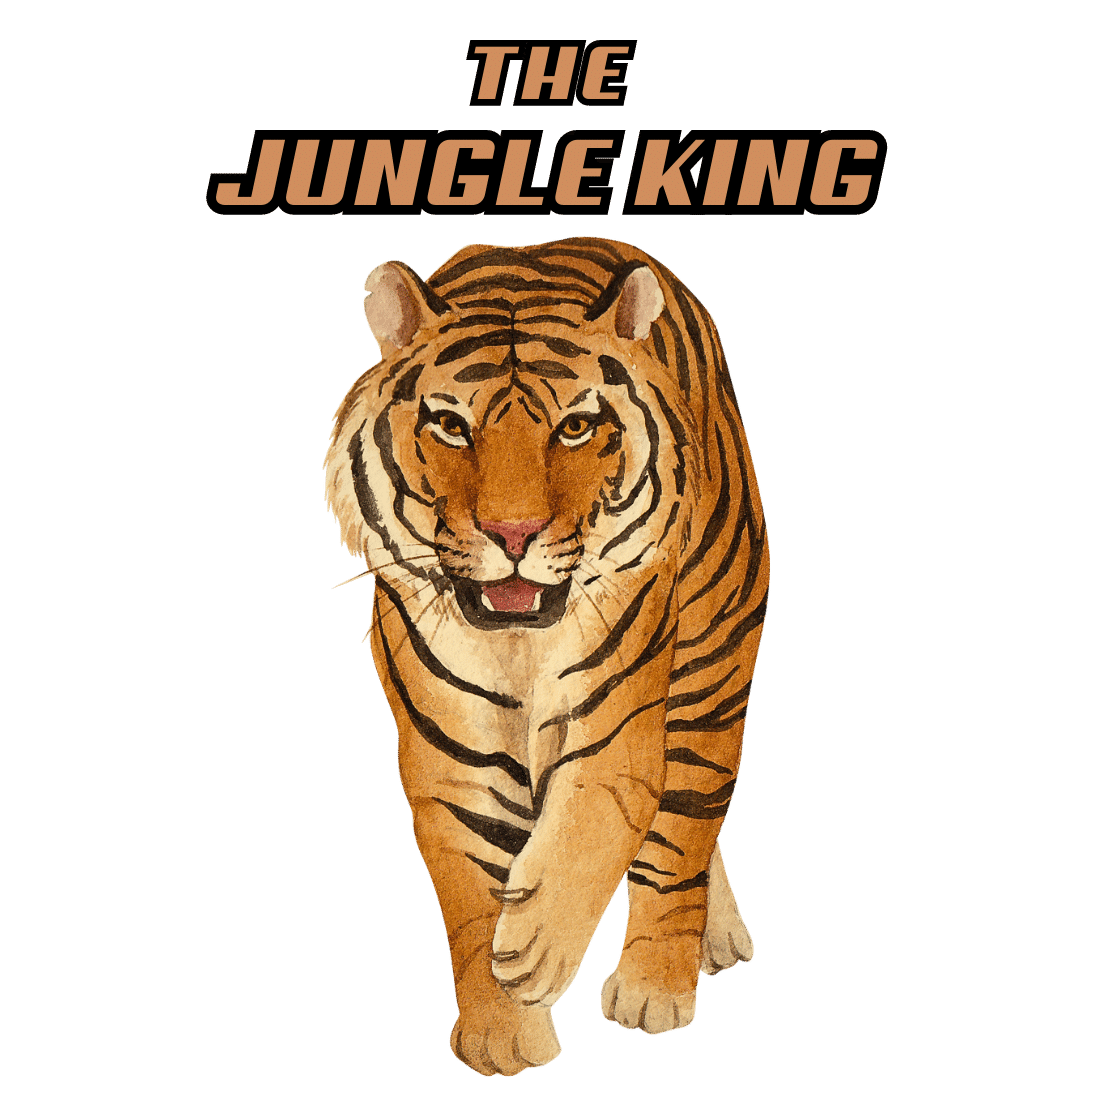 THE JUNGLE KING preview image.